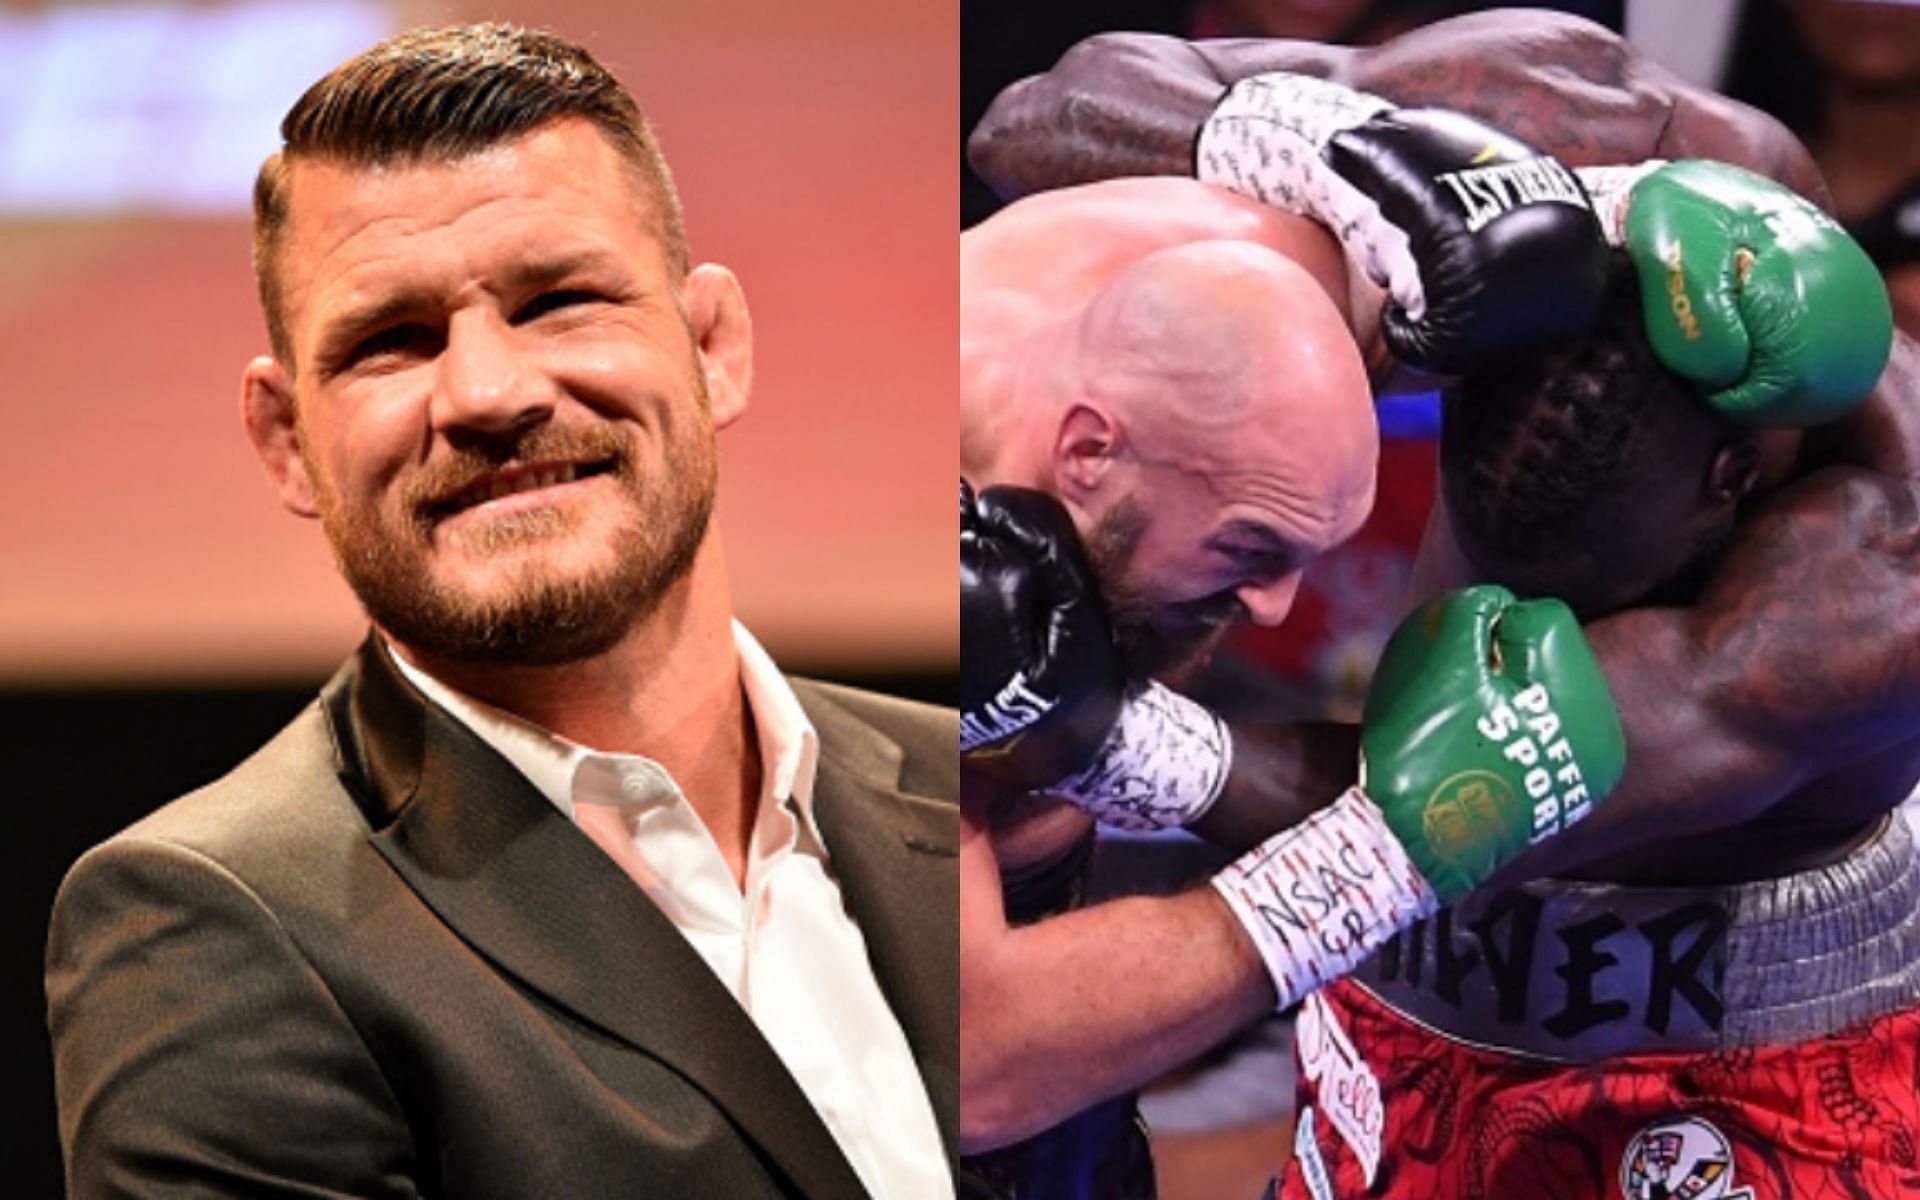 Michael Bisping (left); Tyson Fury (center); Deontay Wilder (right)